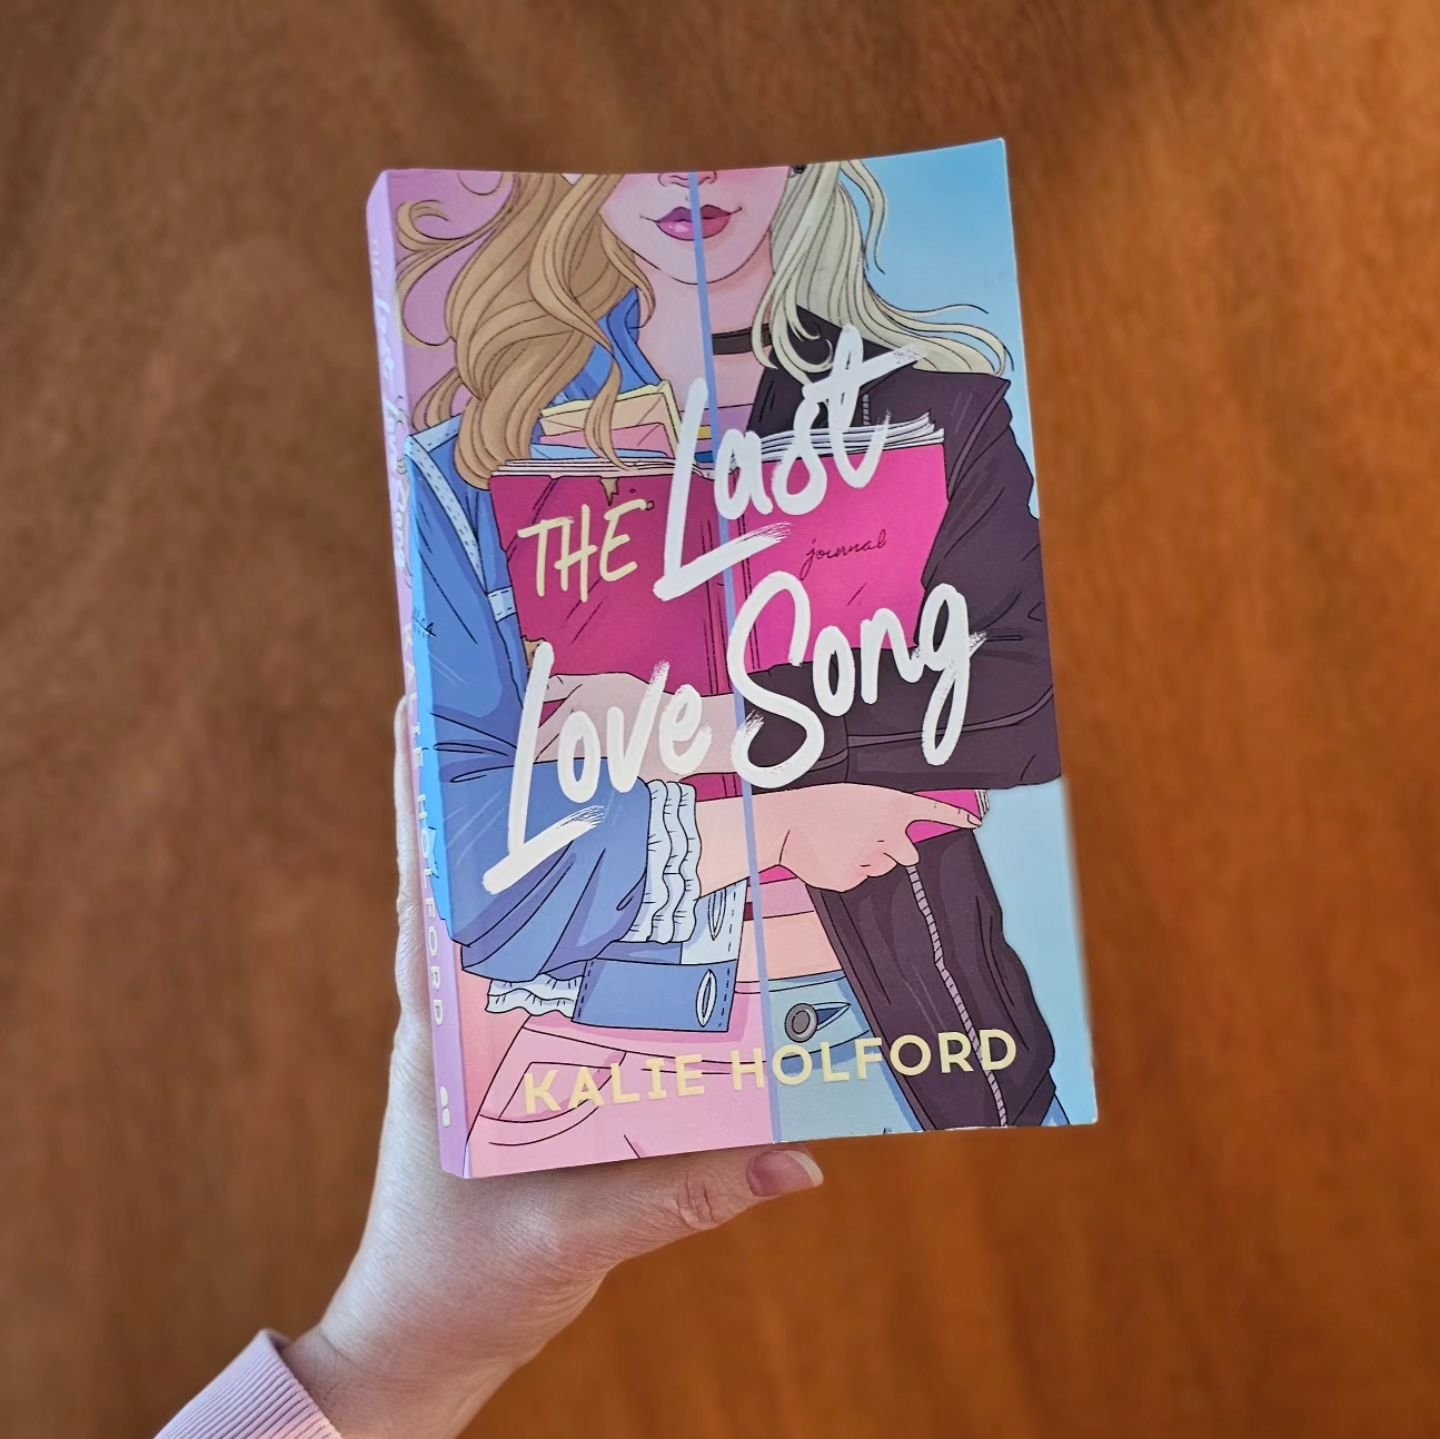 It's THE LAST LOVE SONG day! I've been looking forward to this book release for a long time, and now that it is here my heart is absolutely bursting with joy for @kalieholford and her incredible debut 💖

This book is a true love song filled with poe